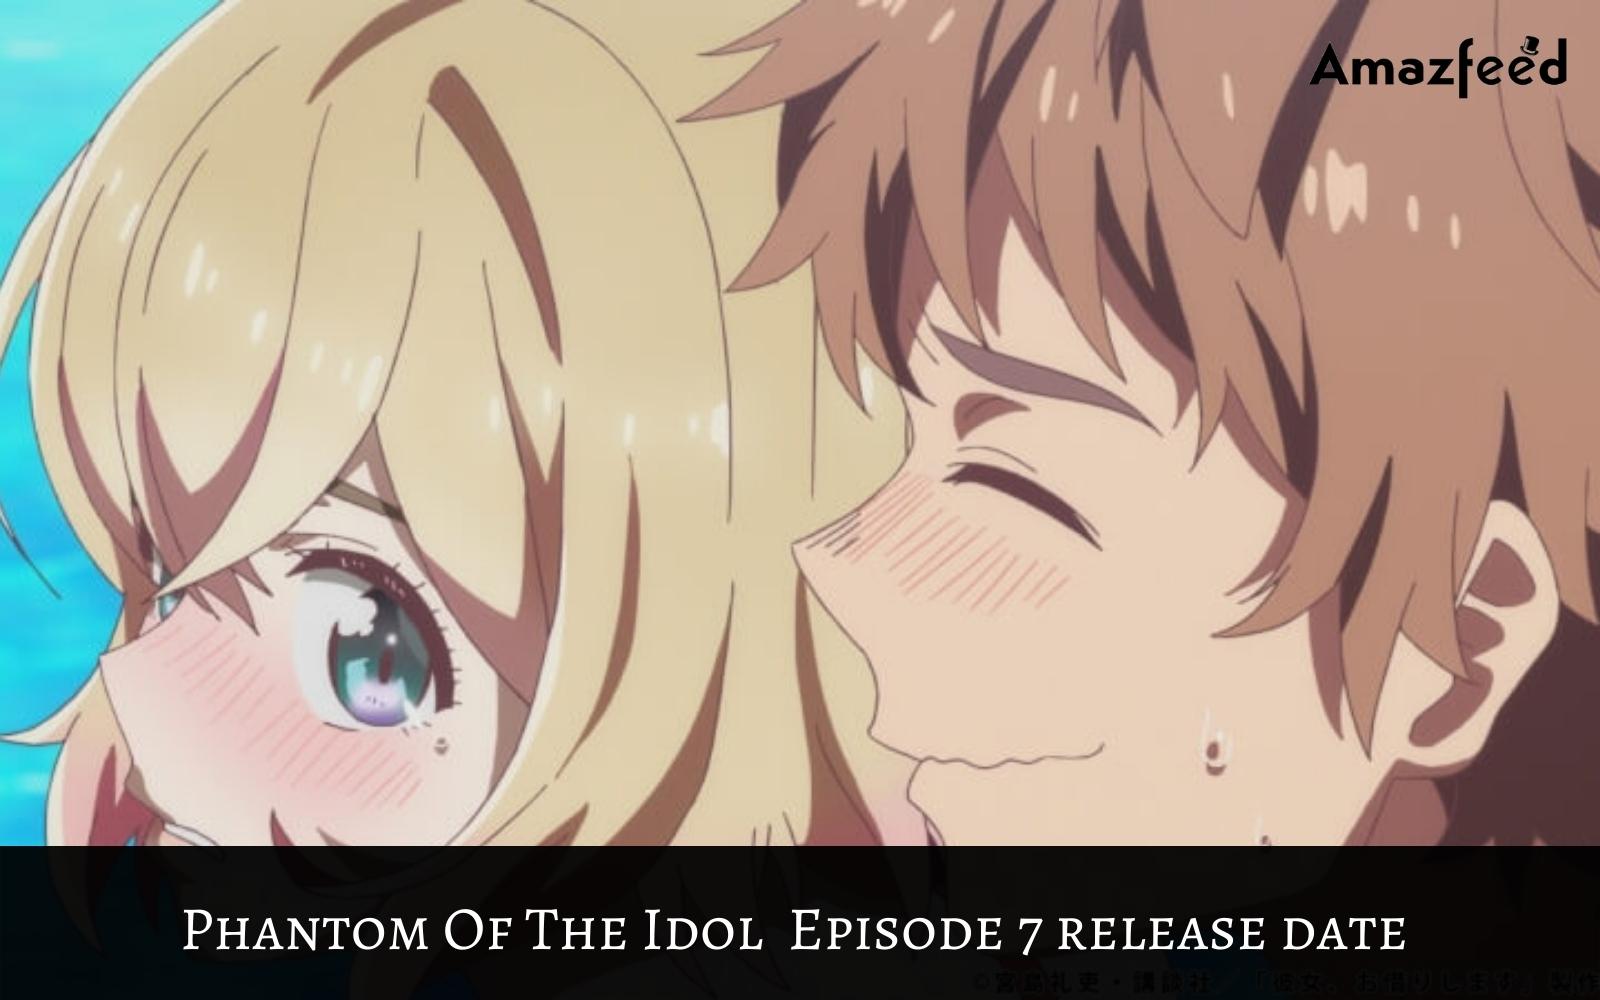 Phantom Of The Idol Episode 7 : Countdown, Release Date, Spoiler, Recap, Cast & Where to Watch